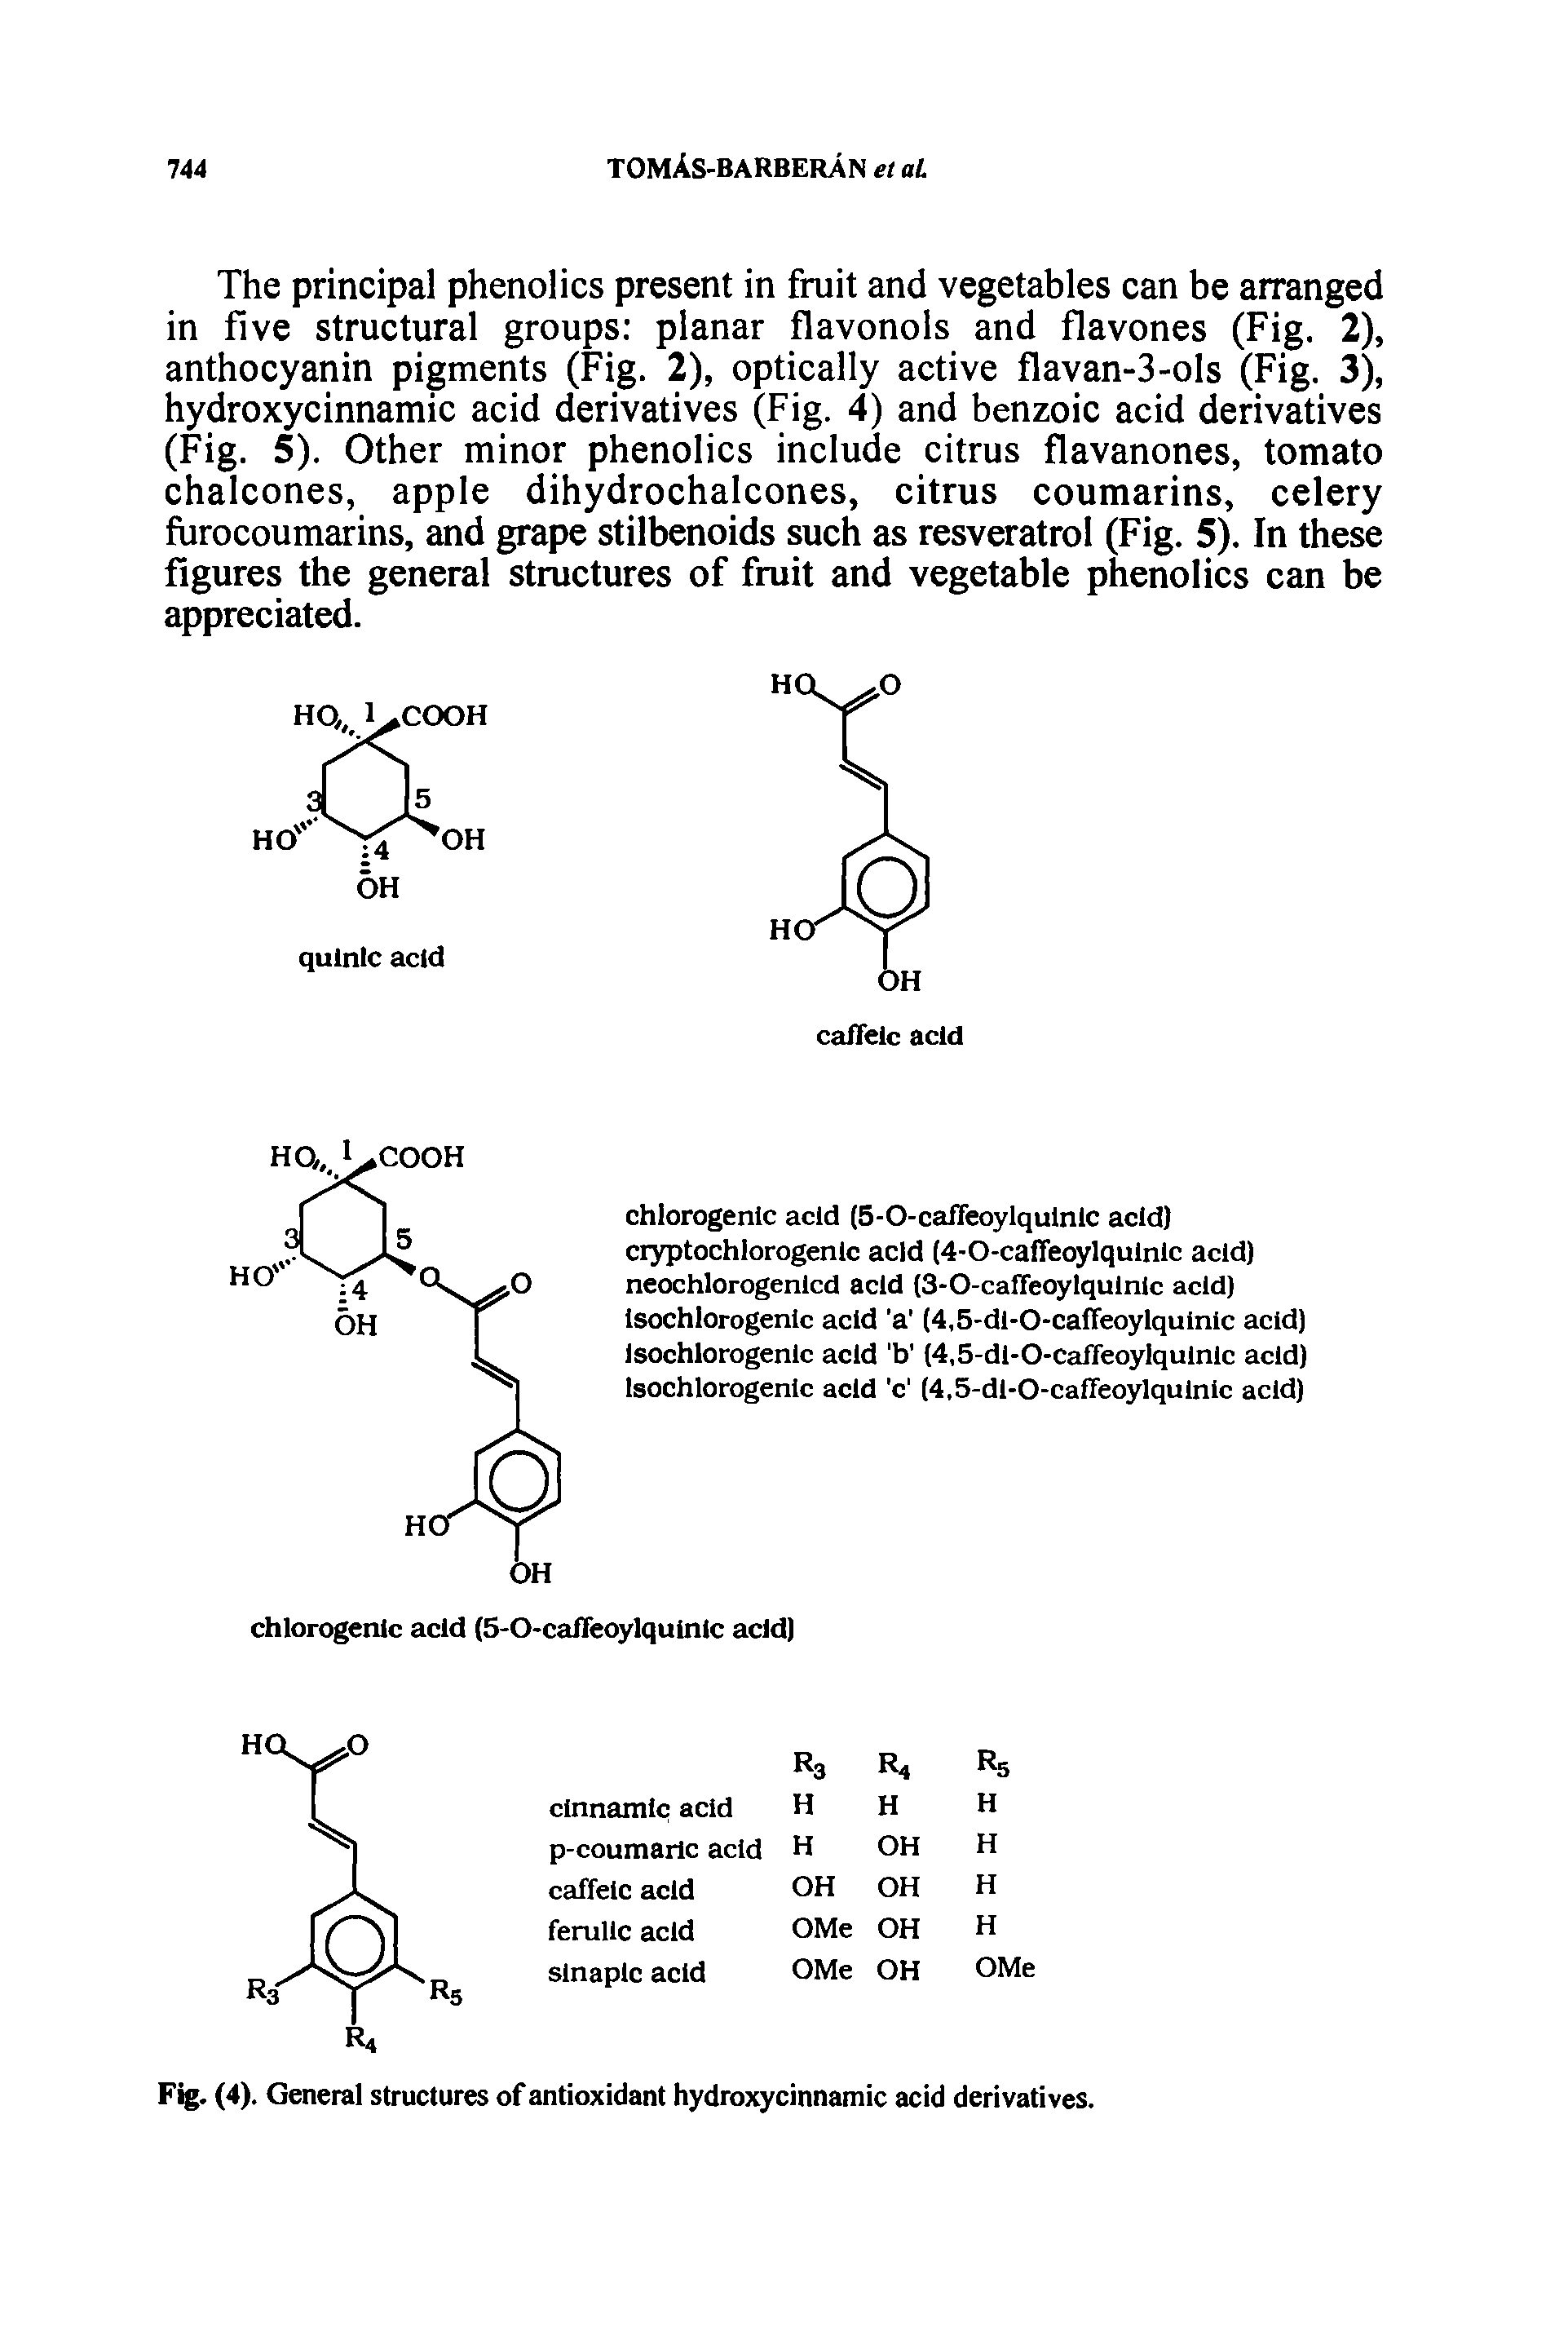 Fig. (4). General structures of antioxidant hydroxycinnamic acid derivatives.